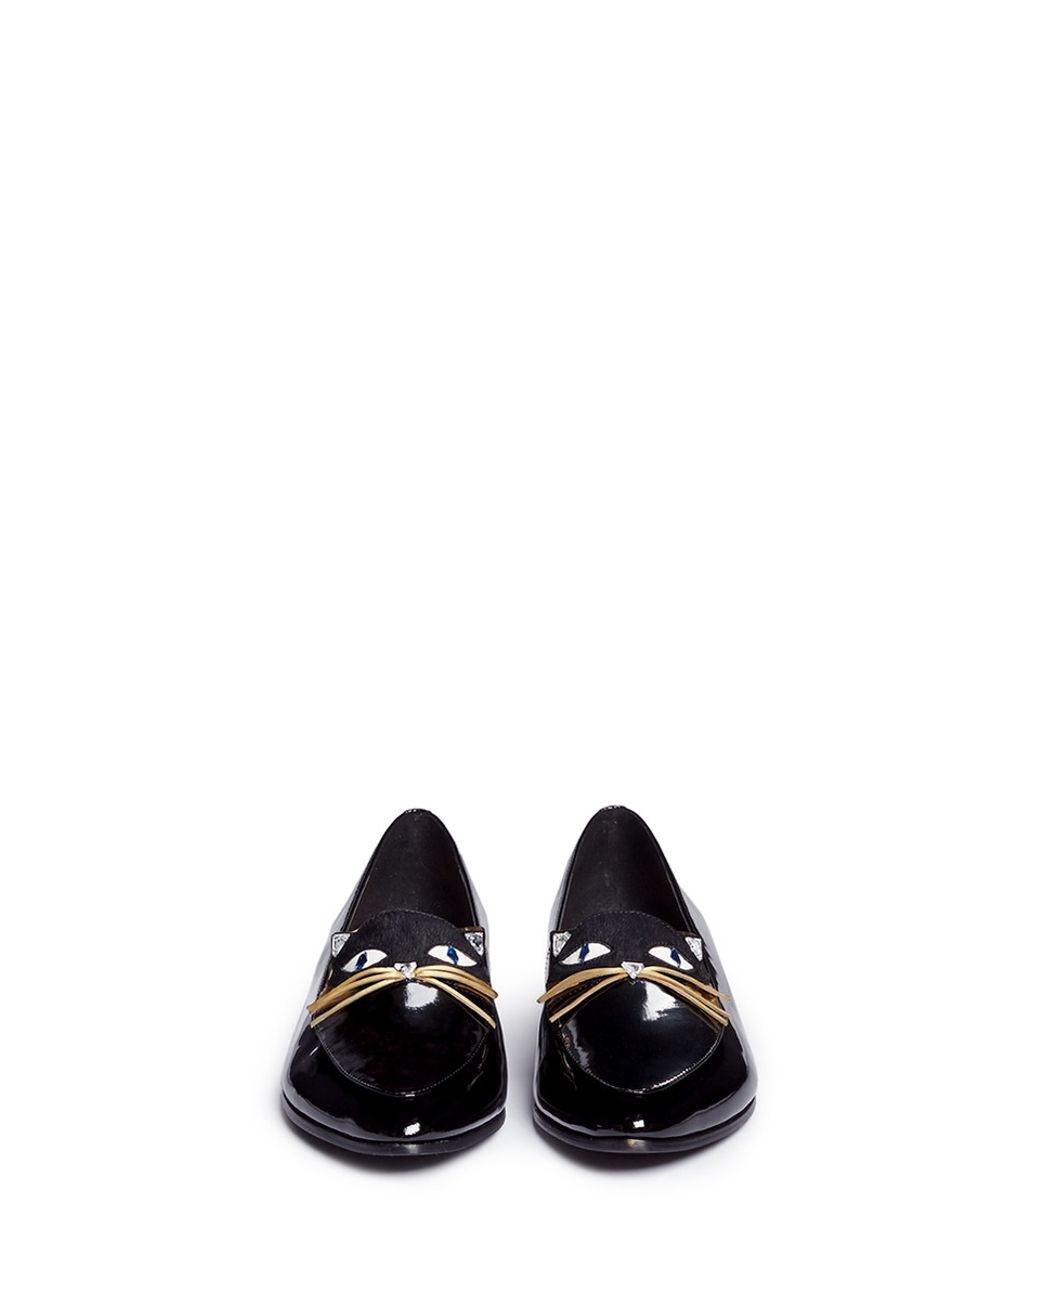 Kate Spade 'cecilia' Calfhair Cat Face Patent Leather Loafers in Black |  Lyst